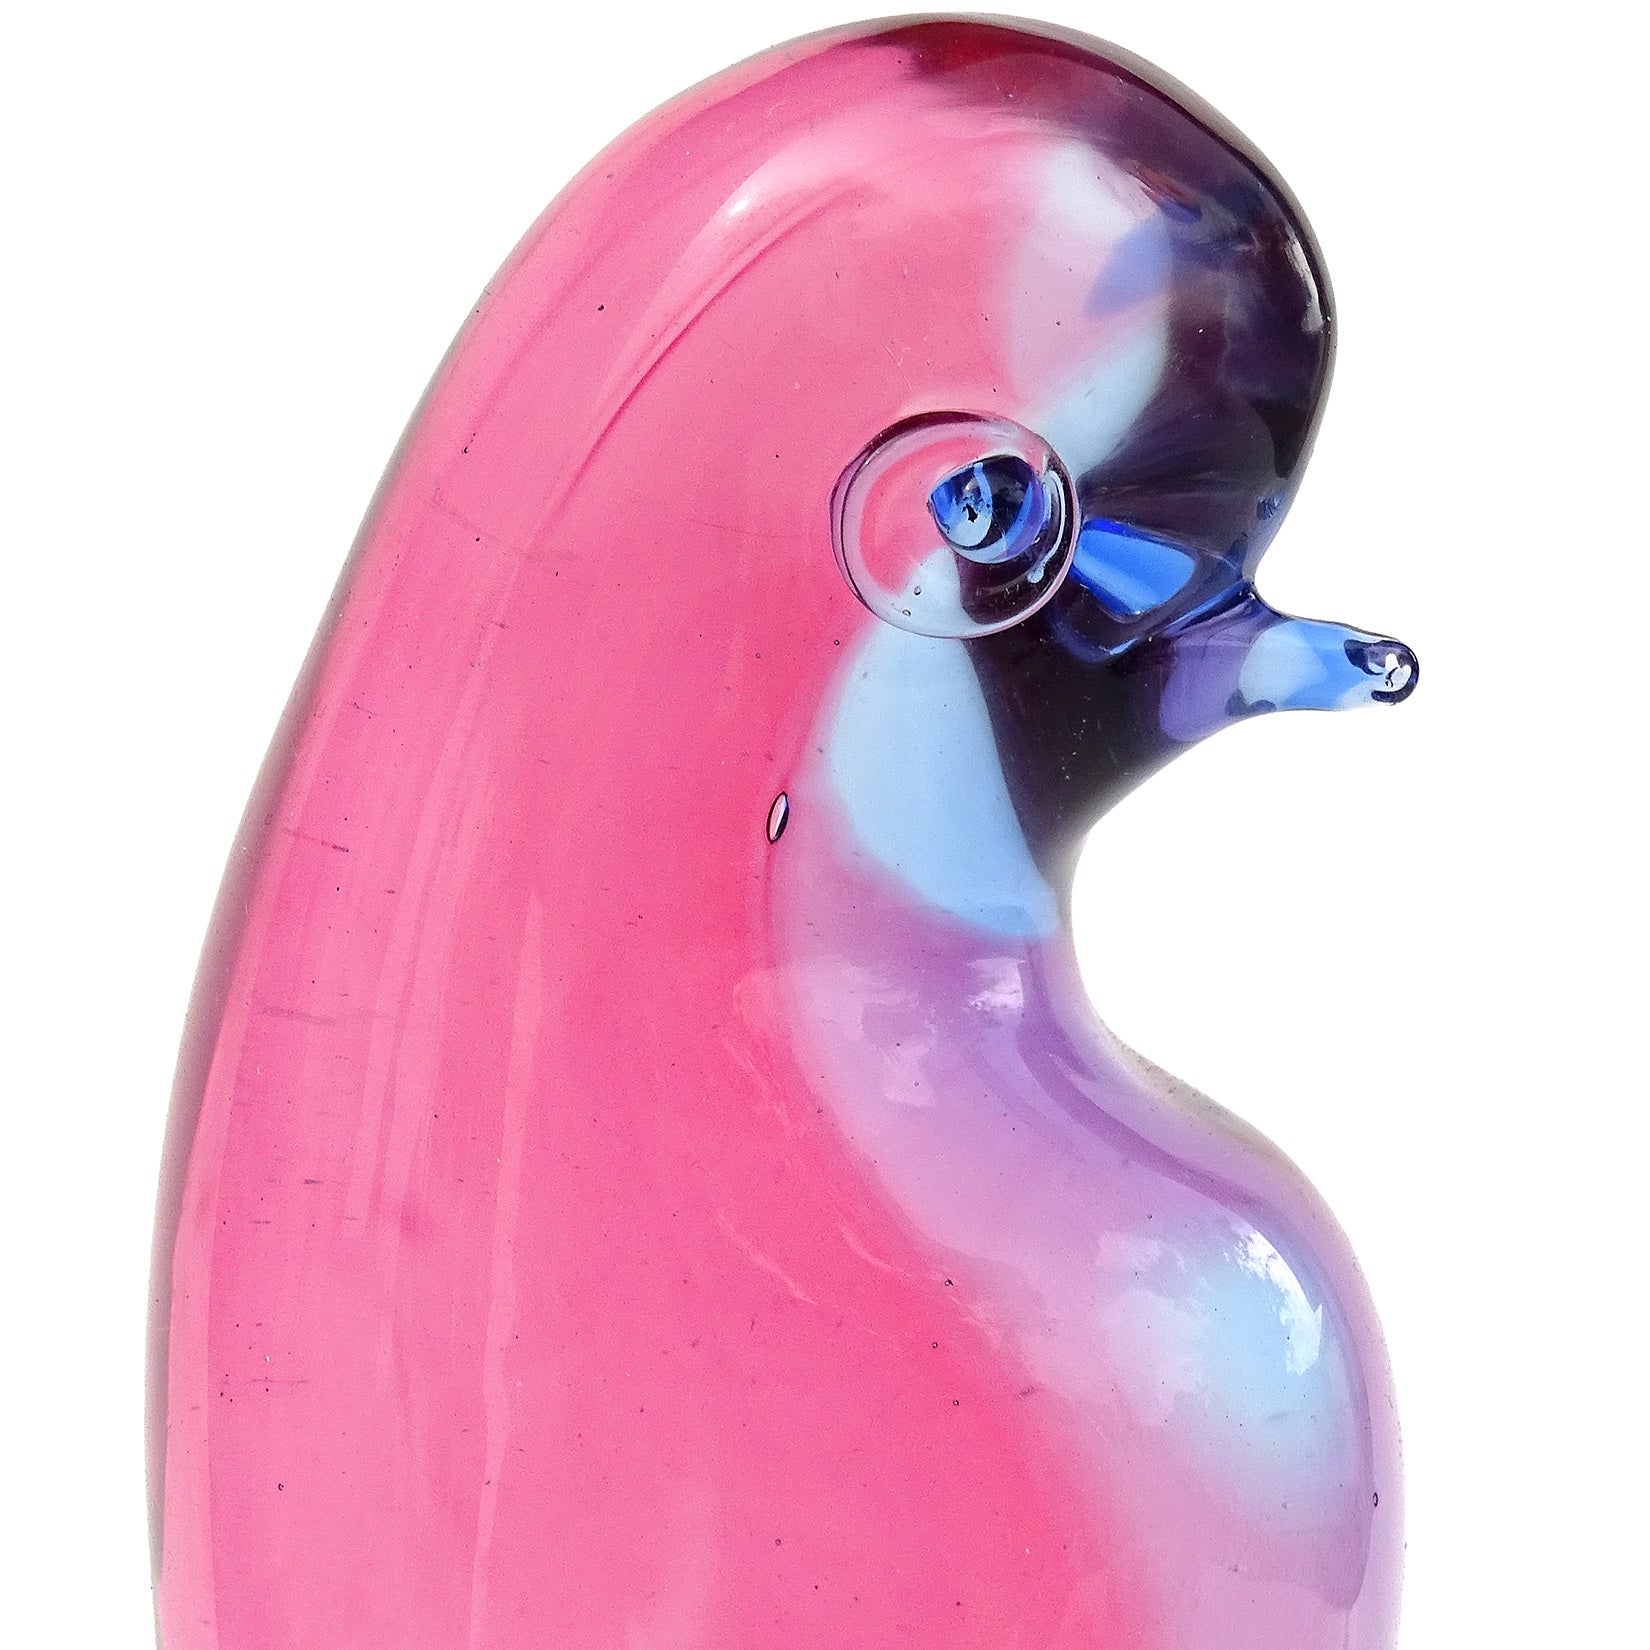 Beautiful and large, vintage Murano hand blown Sommerso pink and blue Italian art glass bird figurine / sculpture. Documented to the Seguso Vetri d'Arte company, circa 1950s. The bird is also polished in the Seguso Vetri d'Arte book, page 141.